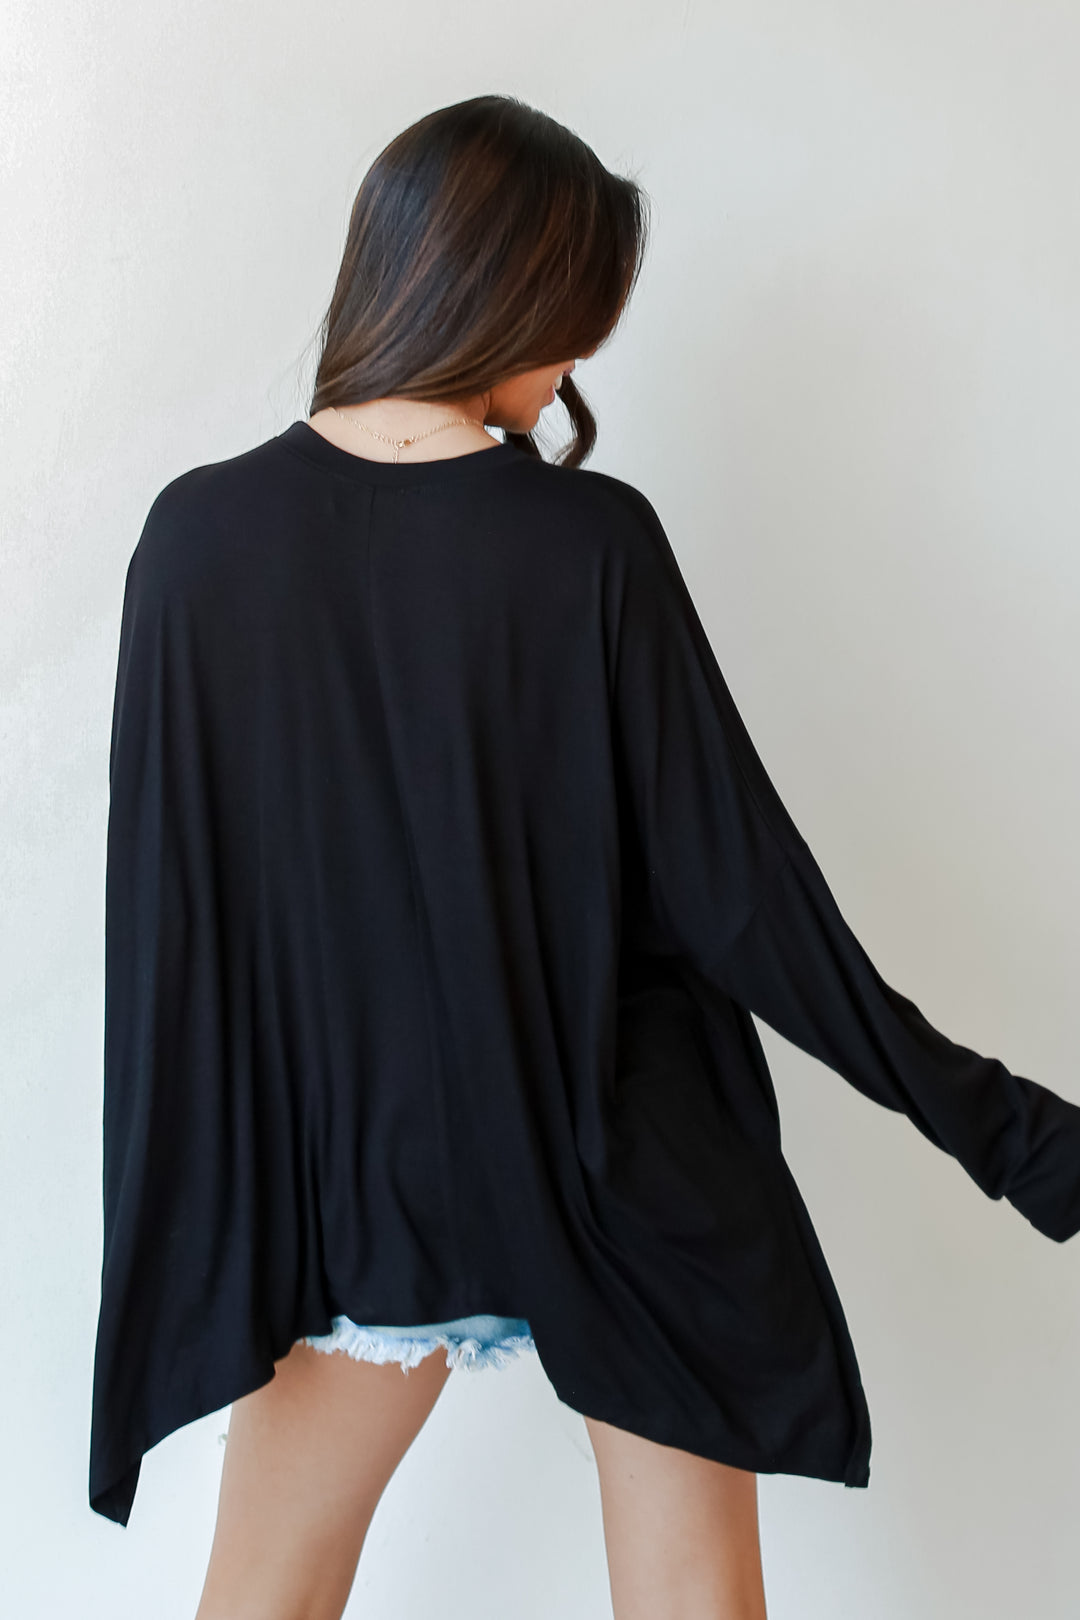 Oversized Jersey Knit Top in black back view